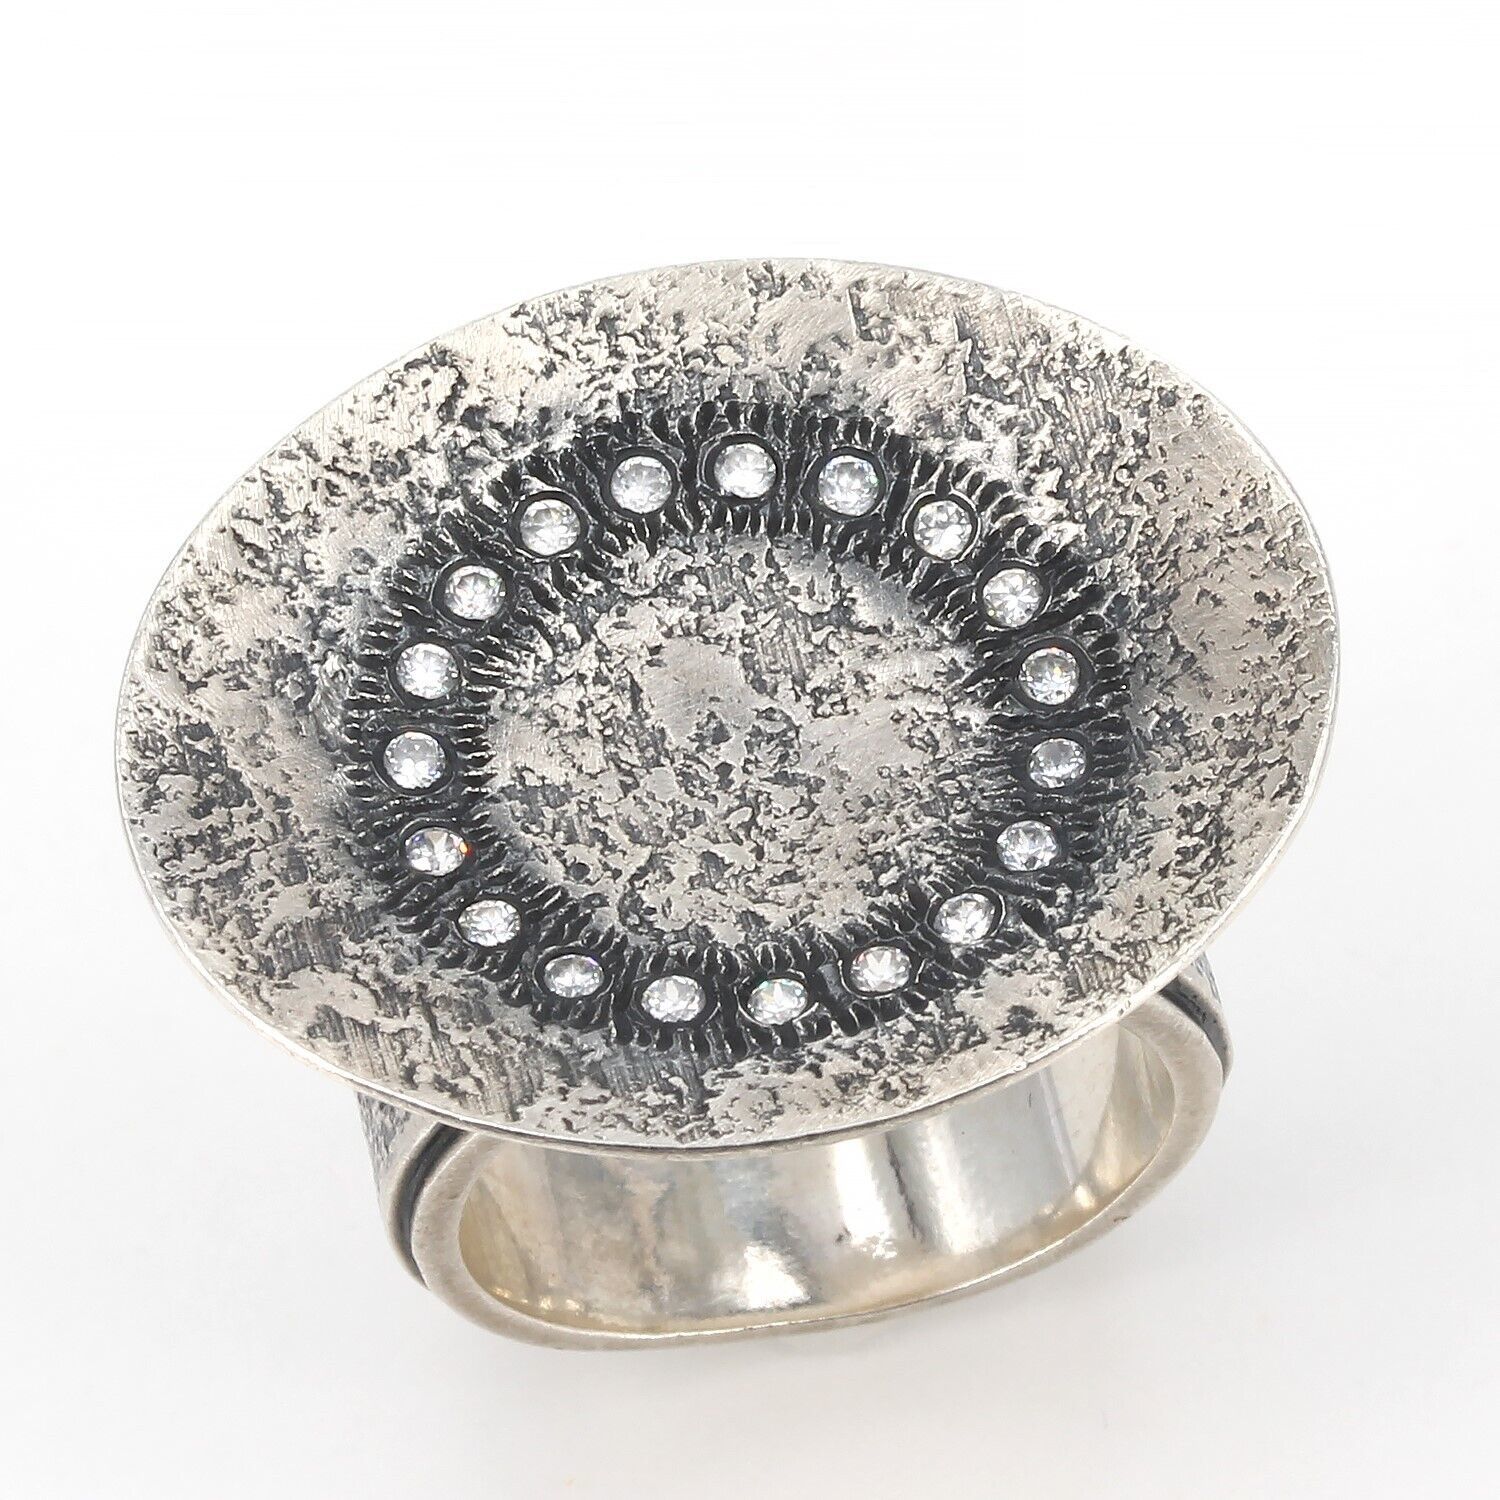 Primary image for Retired Silpada Textured Oxidized Sterling CZ COSMIC Disc Ring R1977 Size 7.25